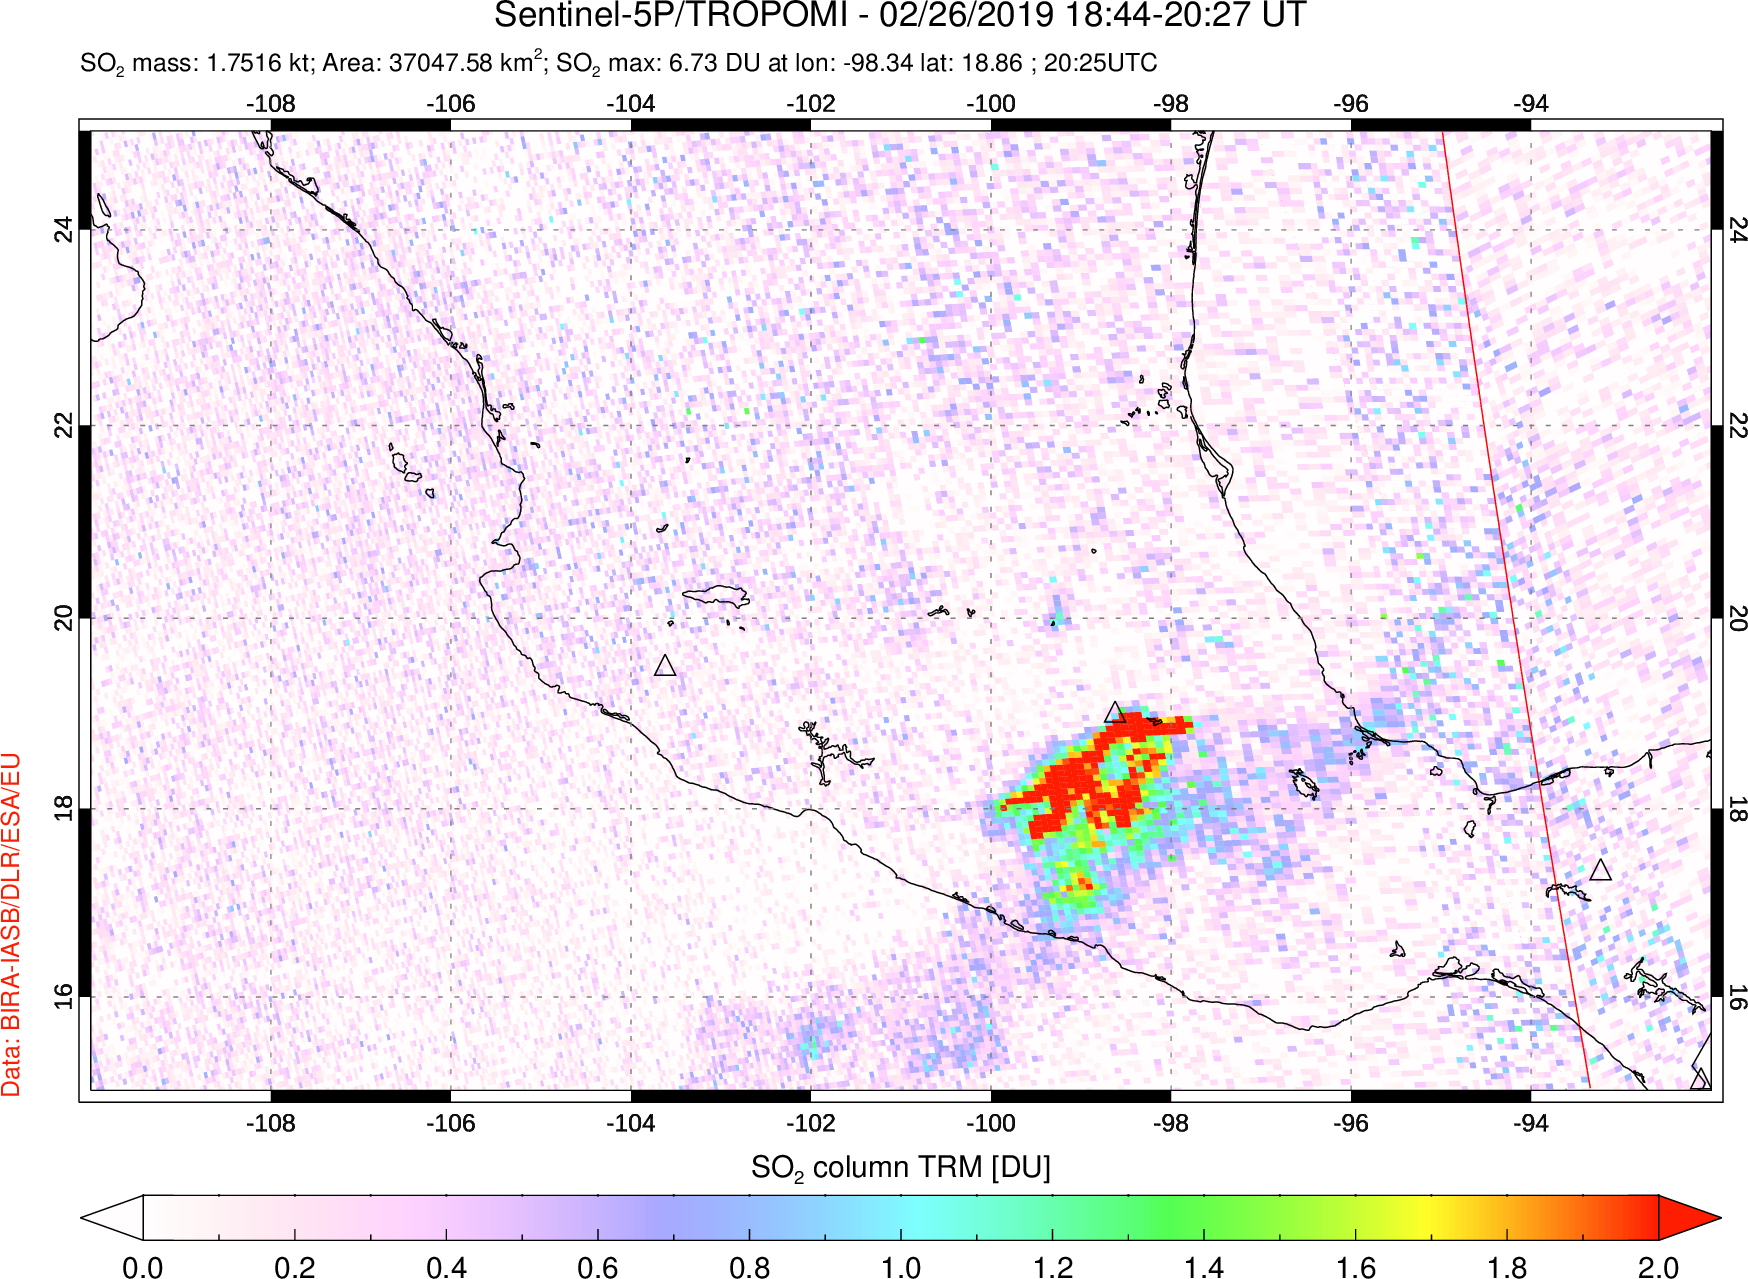 A sulfur dioxide image over Mexico on Feb 26, 2019.